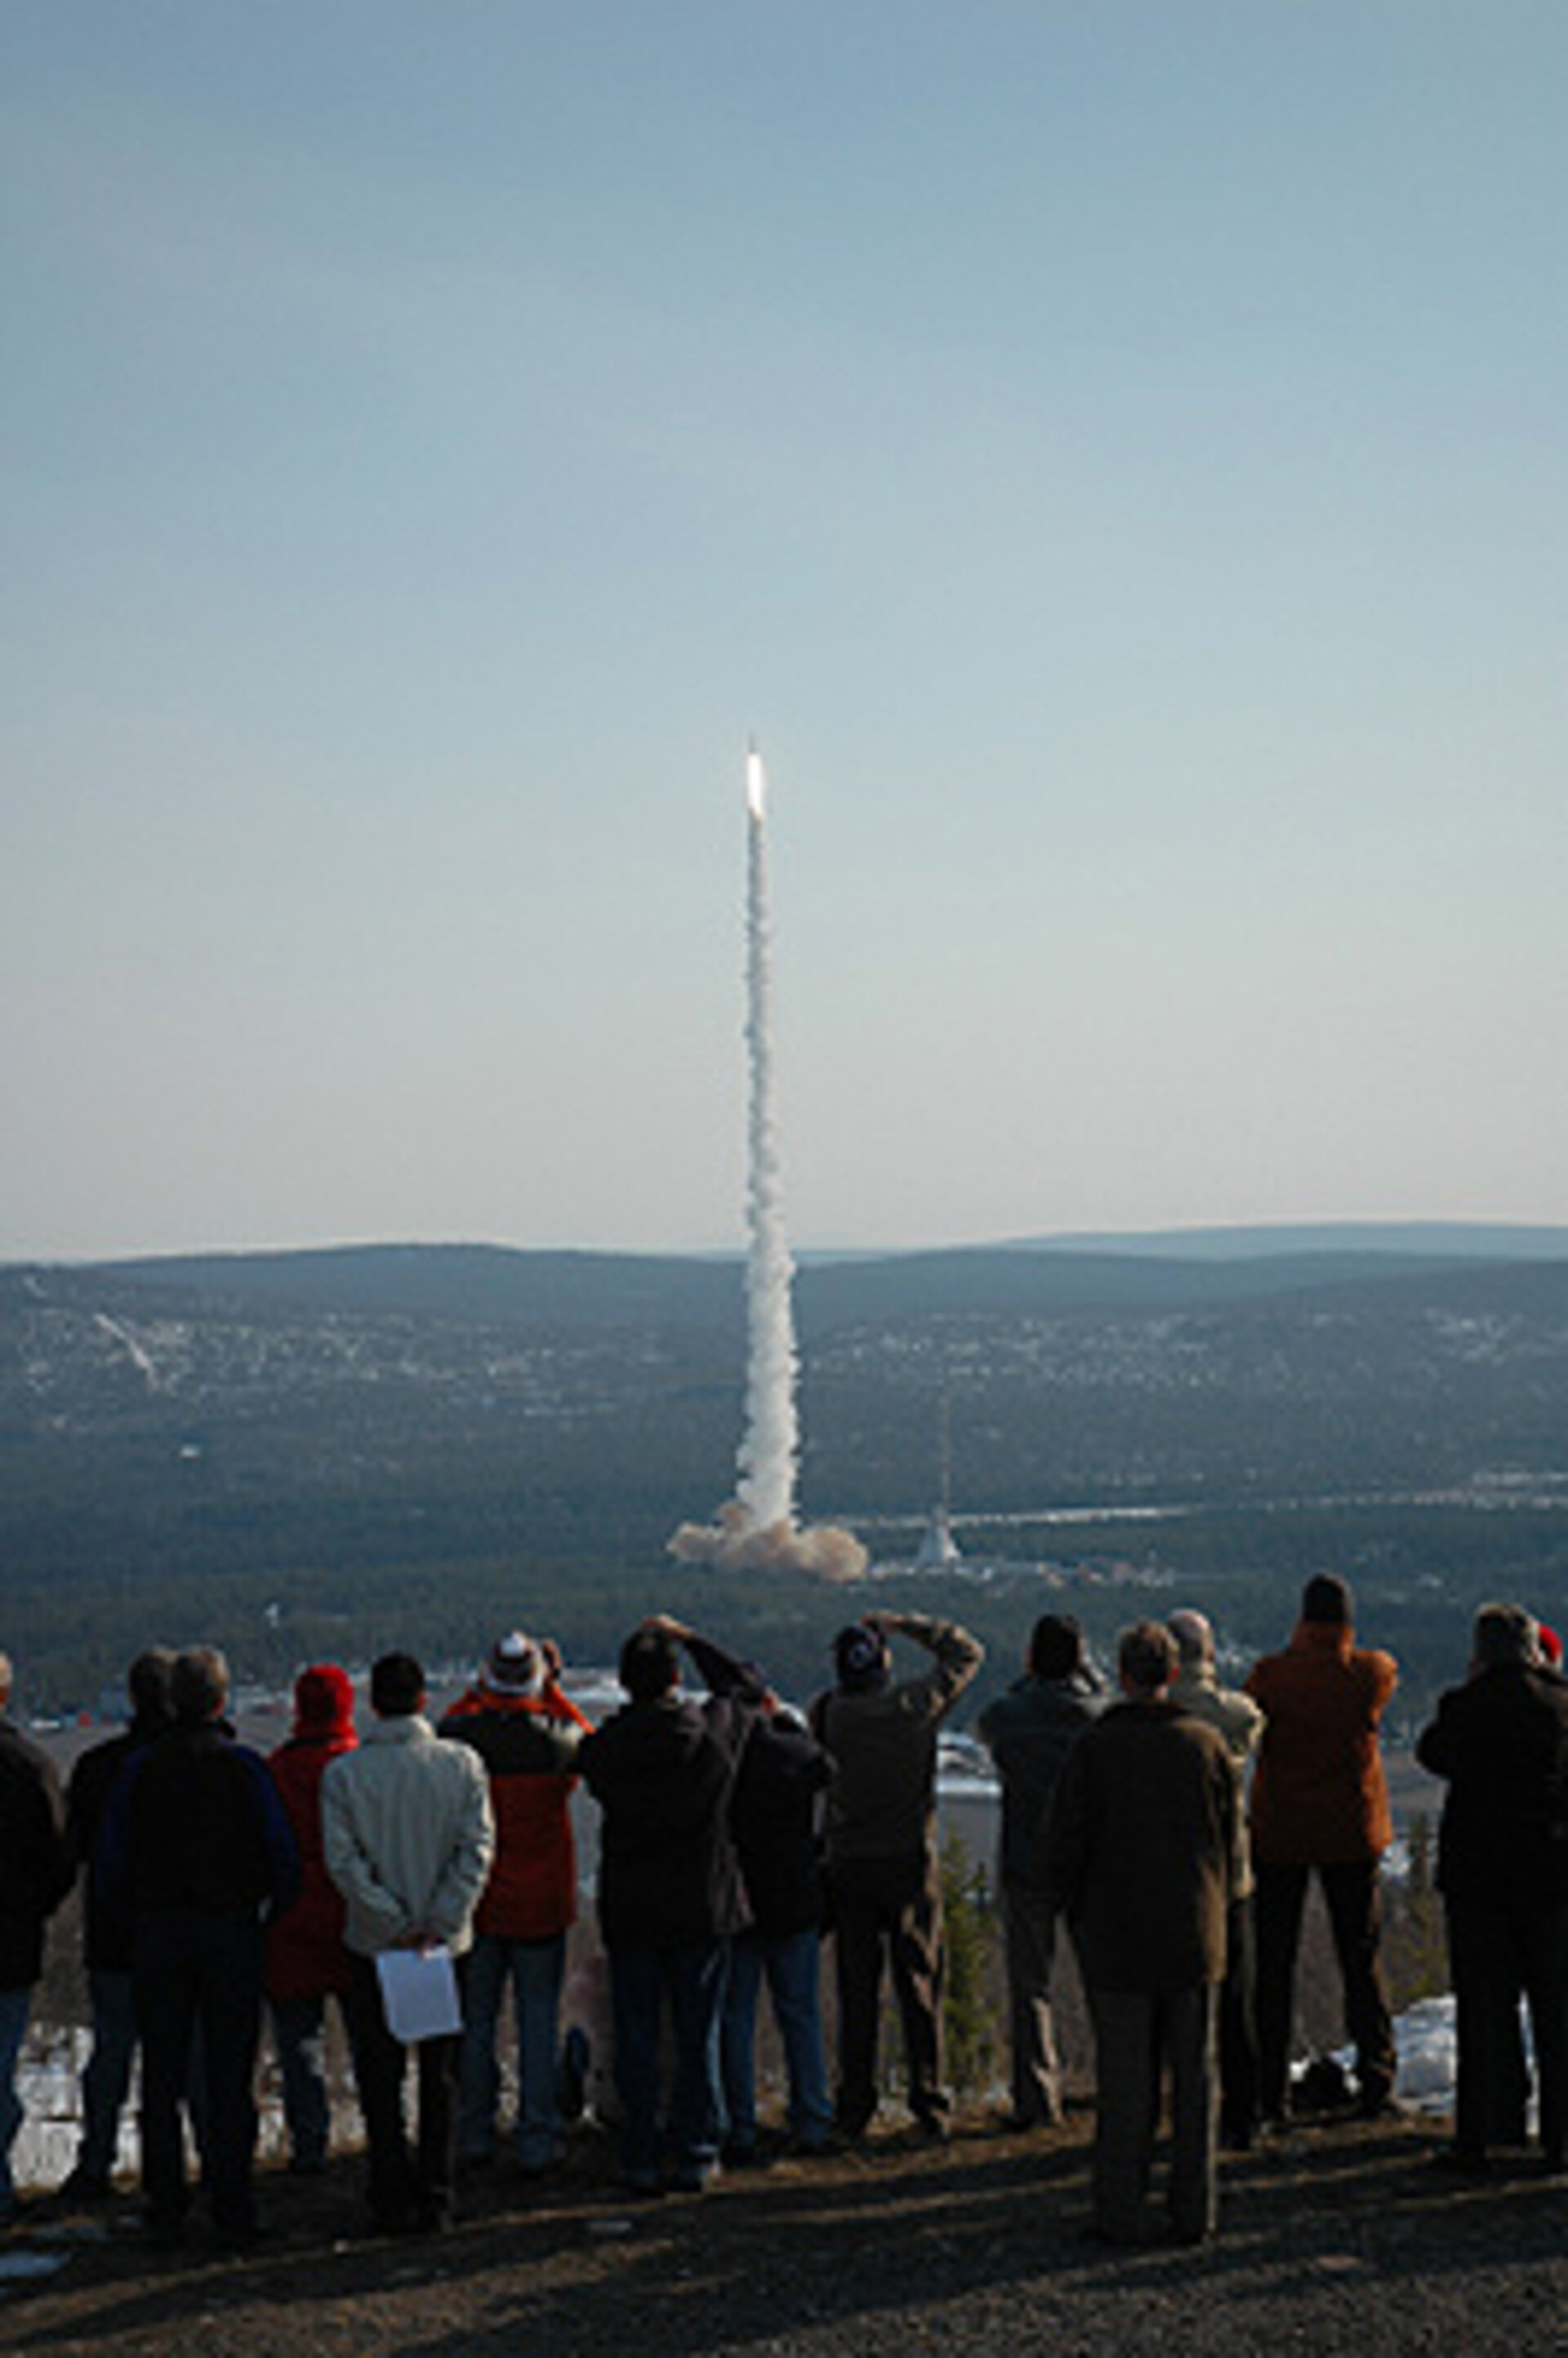 Maxus 7 launches into a clear sky